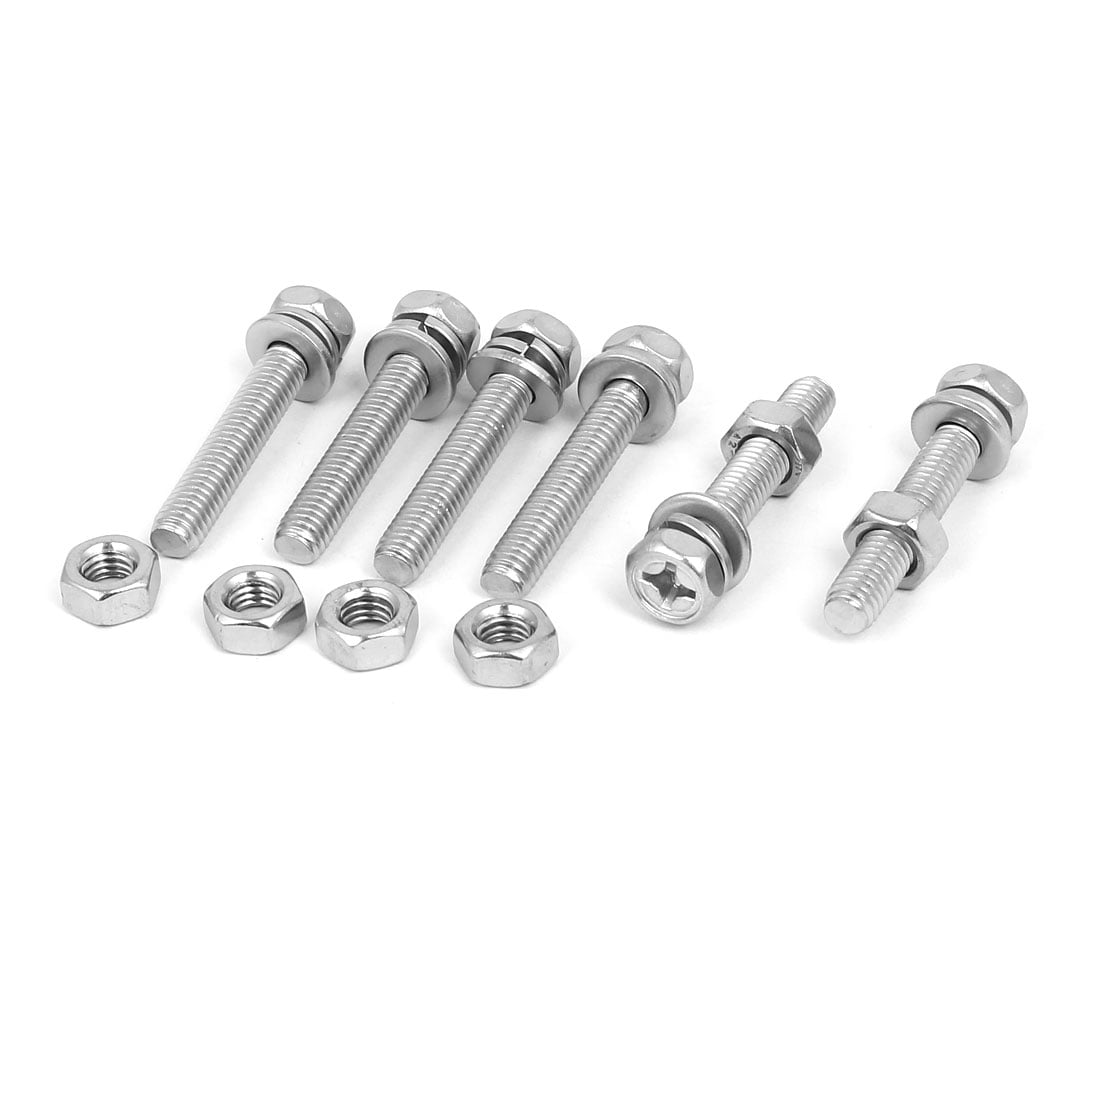 10pcs 304 Stainless Steel M4x20mm Hex Bolts w Nuts and Washers Assortment Kit 